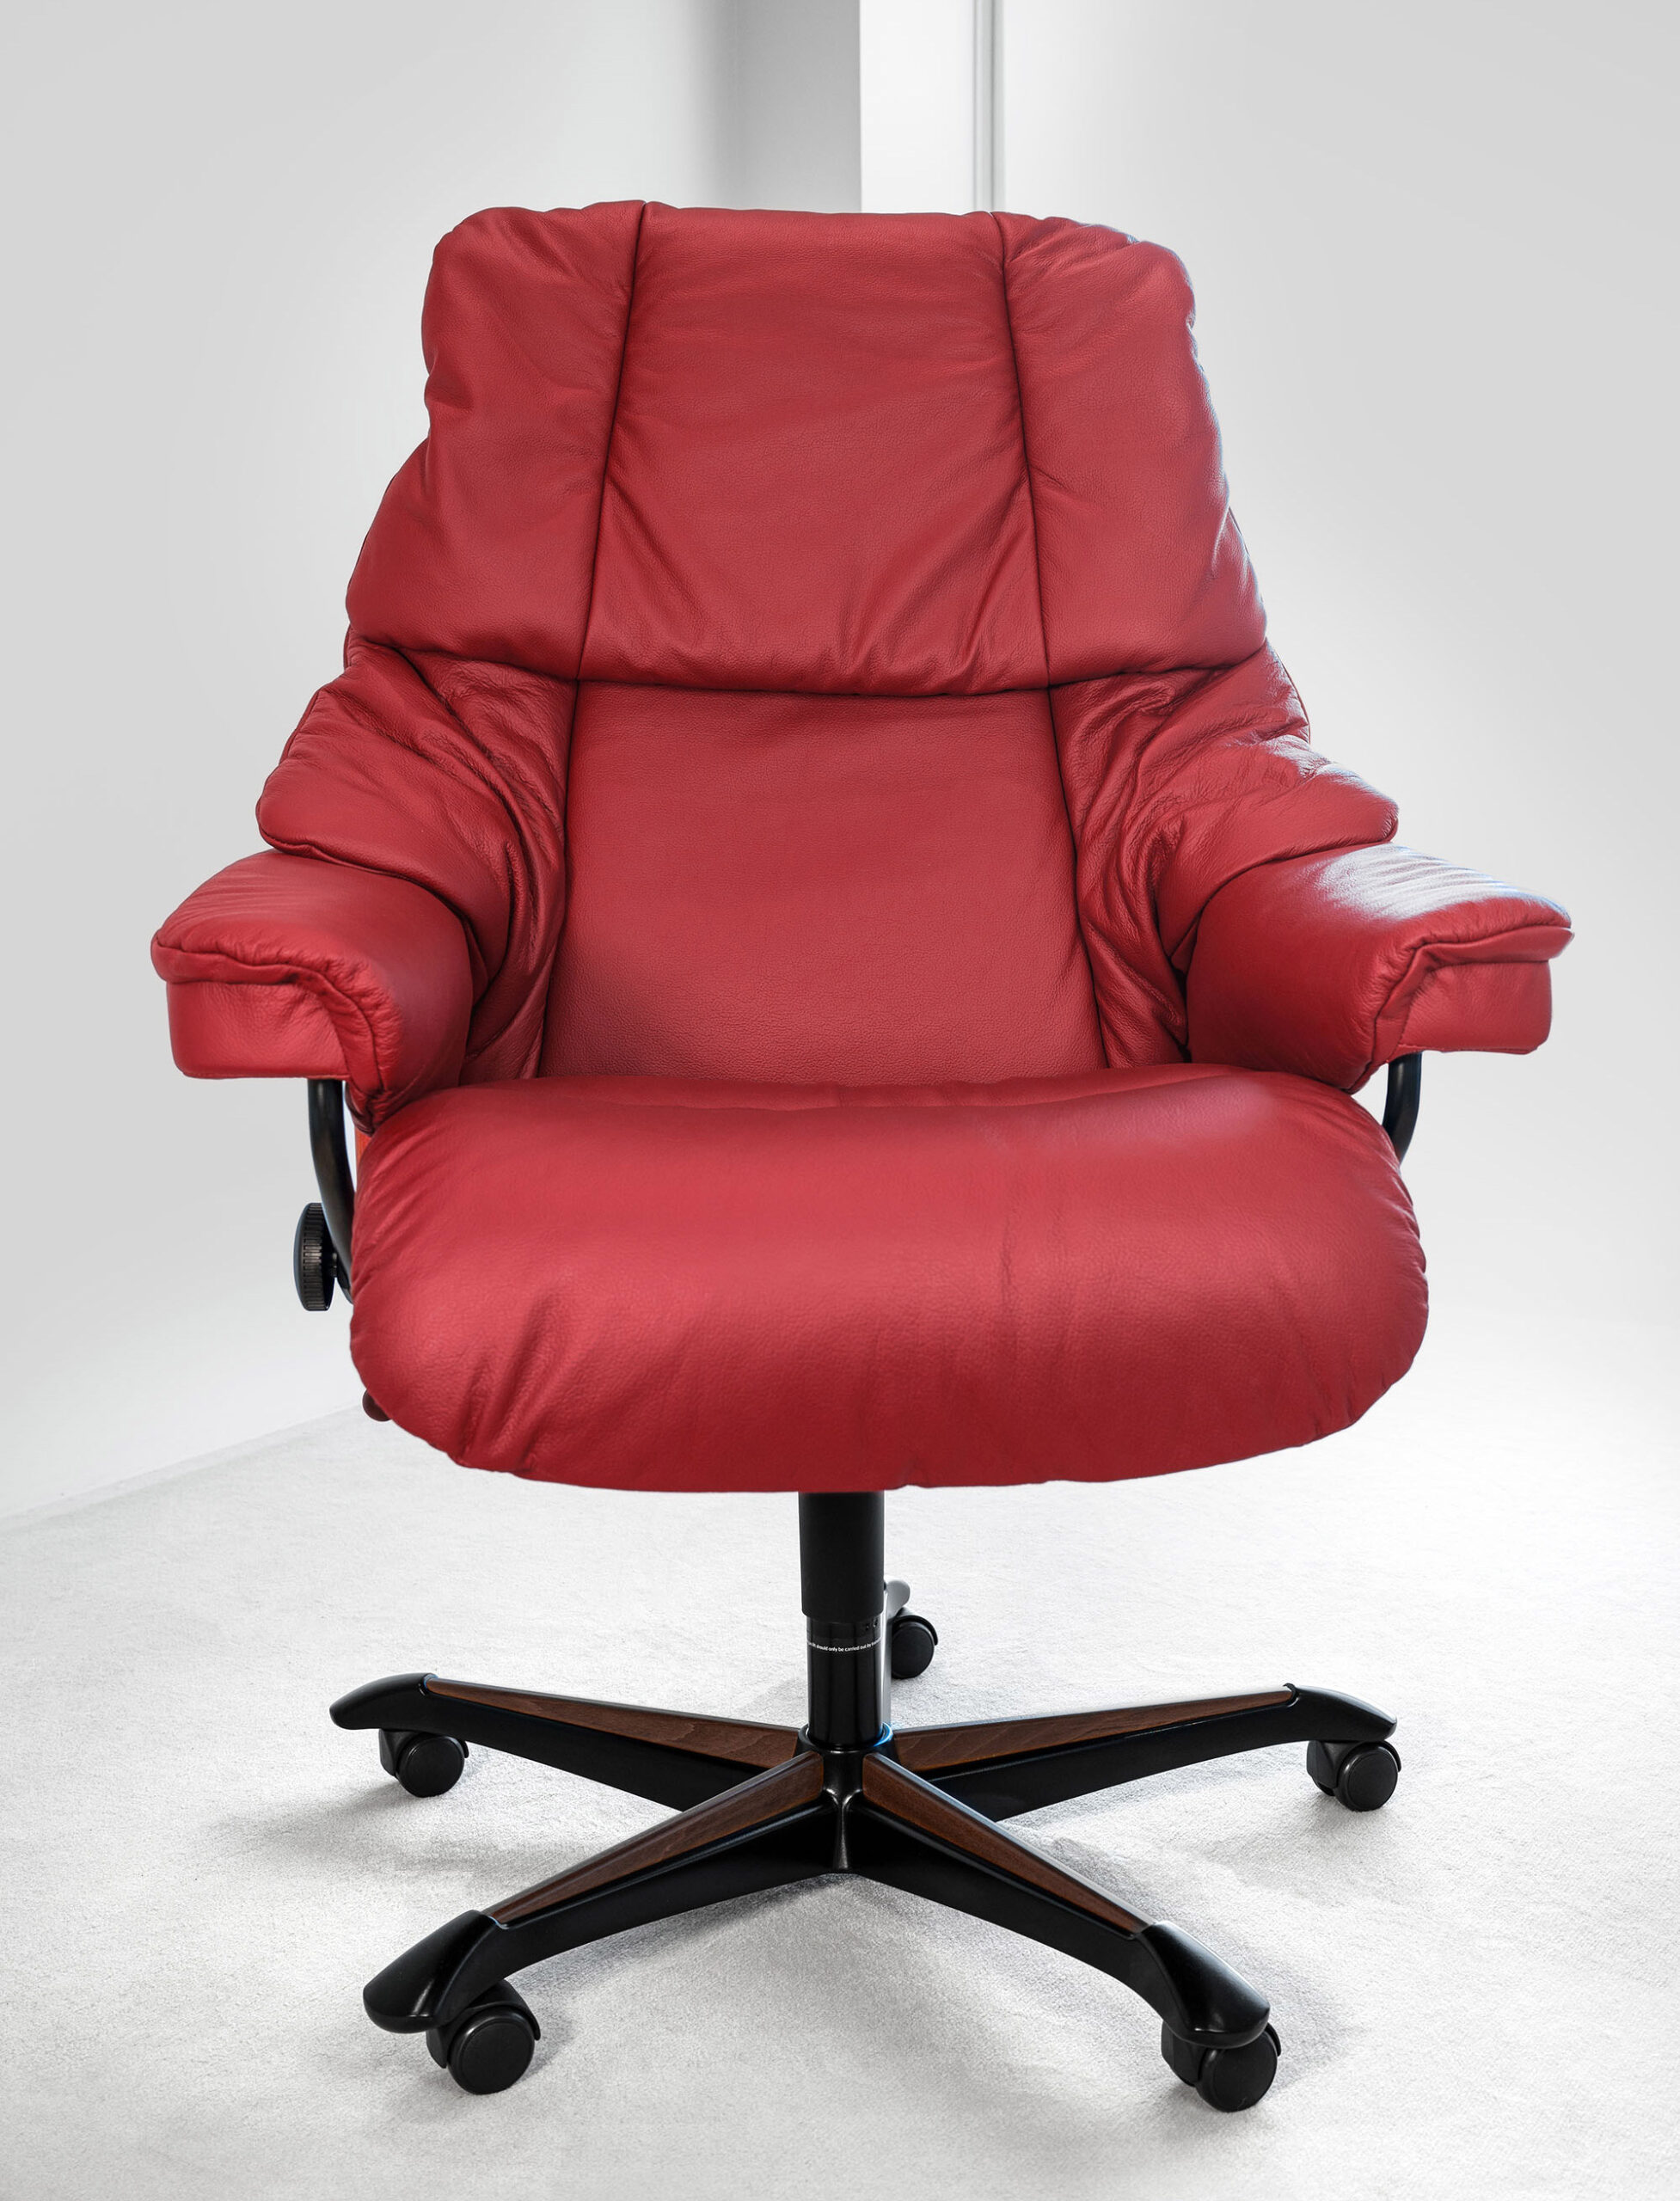 Stressless Reno - Executive Office Chair